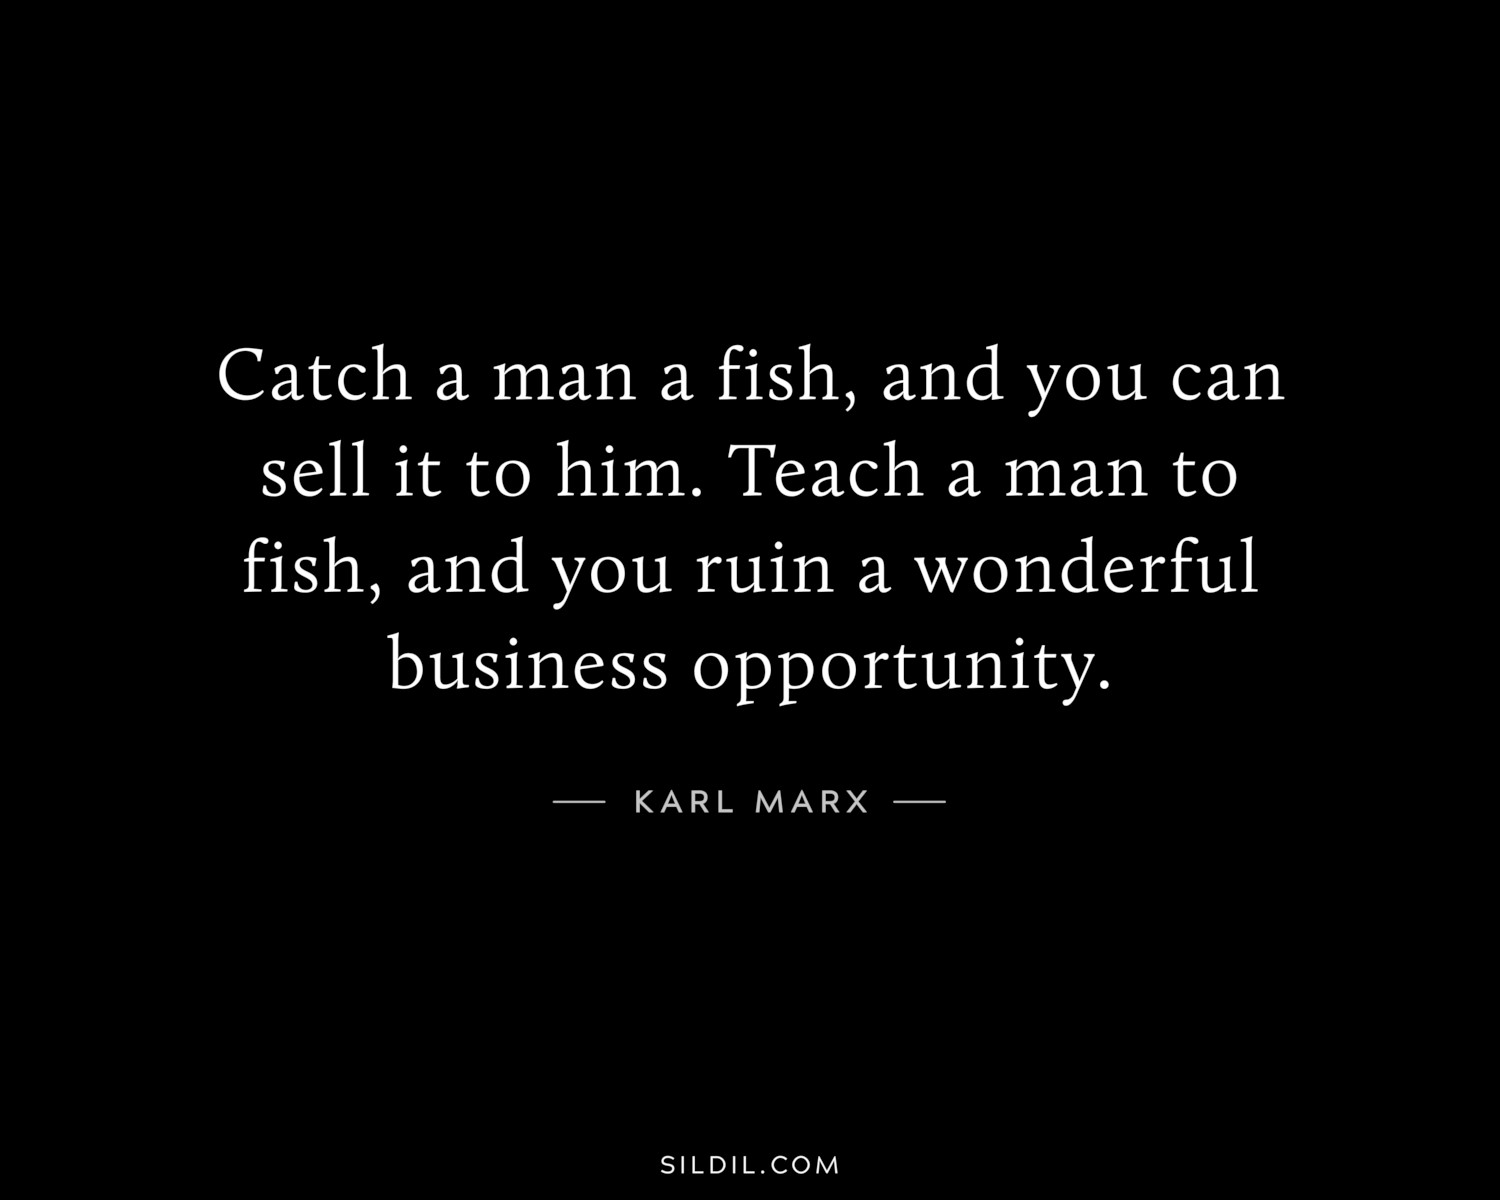 Catch a man a fish, and you can sell it to him. Teach a man to fish, and you ruin a wonderful business opportunity.